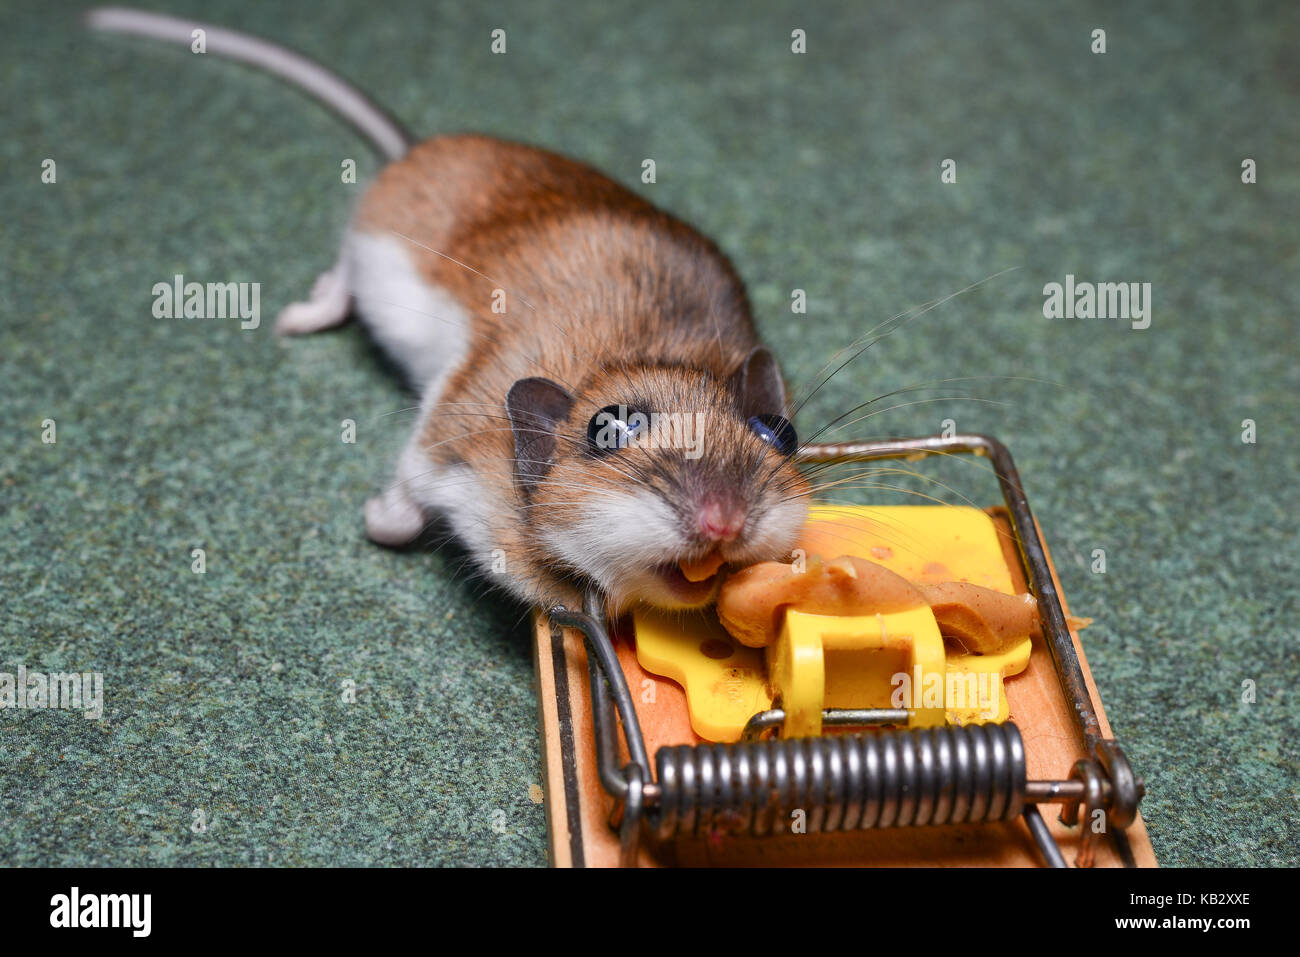 Dead mouse killed in a mouse trap on the kitchen counter baited with peanut butter. Stock Photo